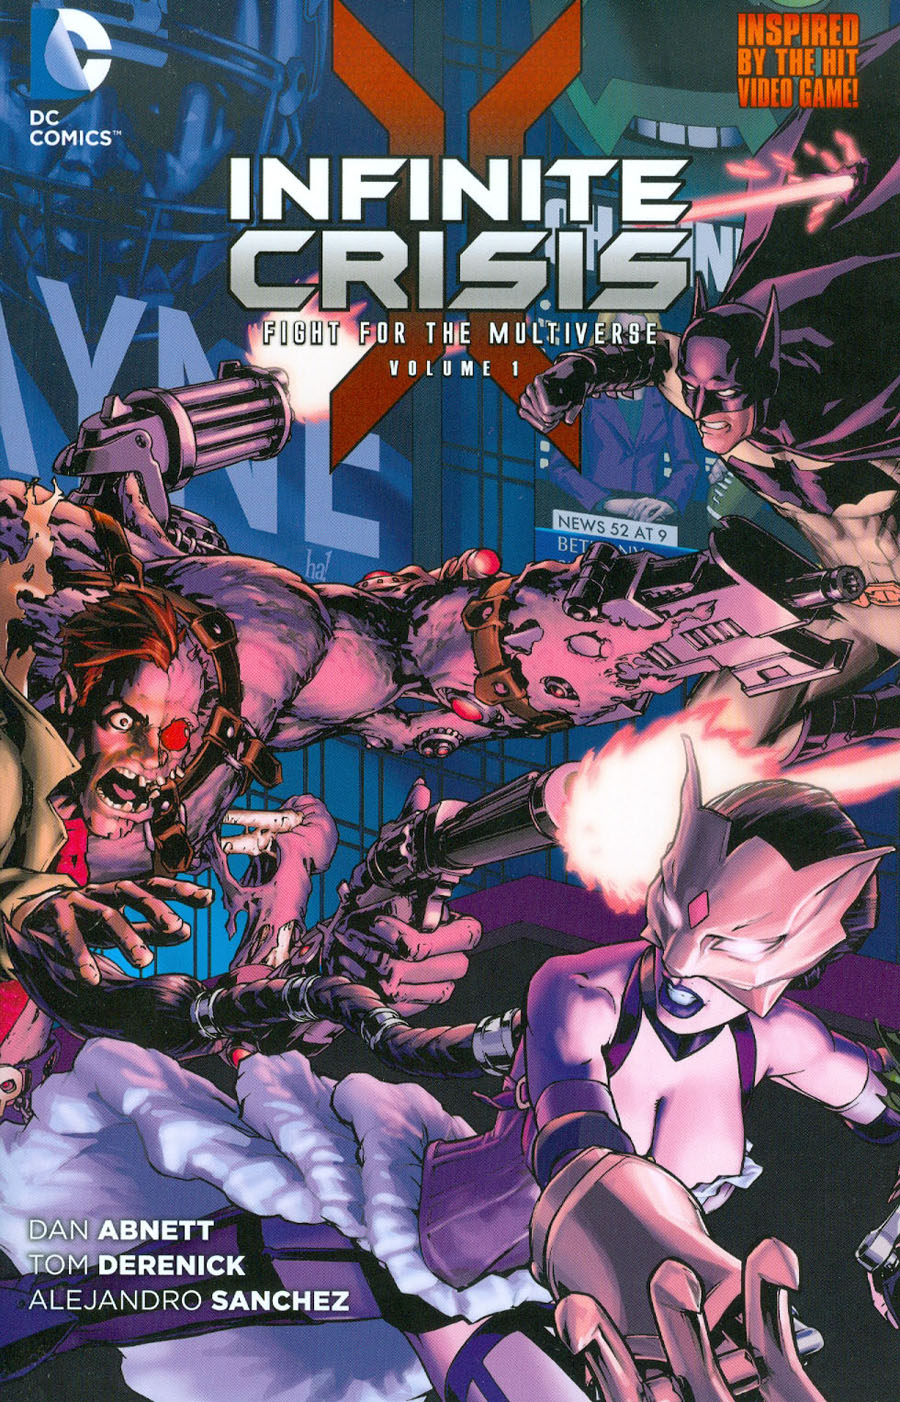 Infinite Crisis Fight For The Multiverse Vol 1 TP